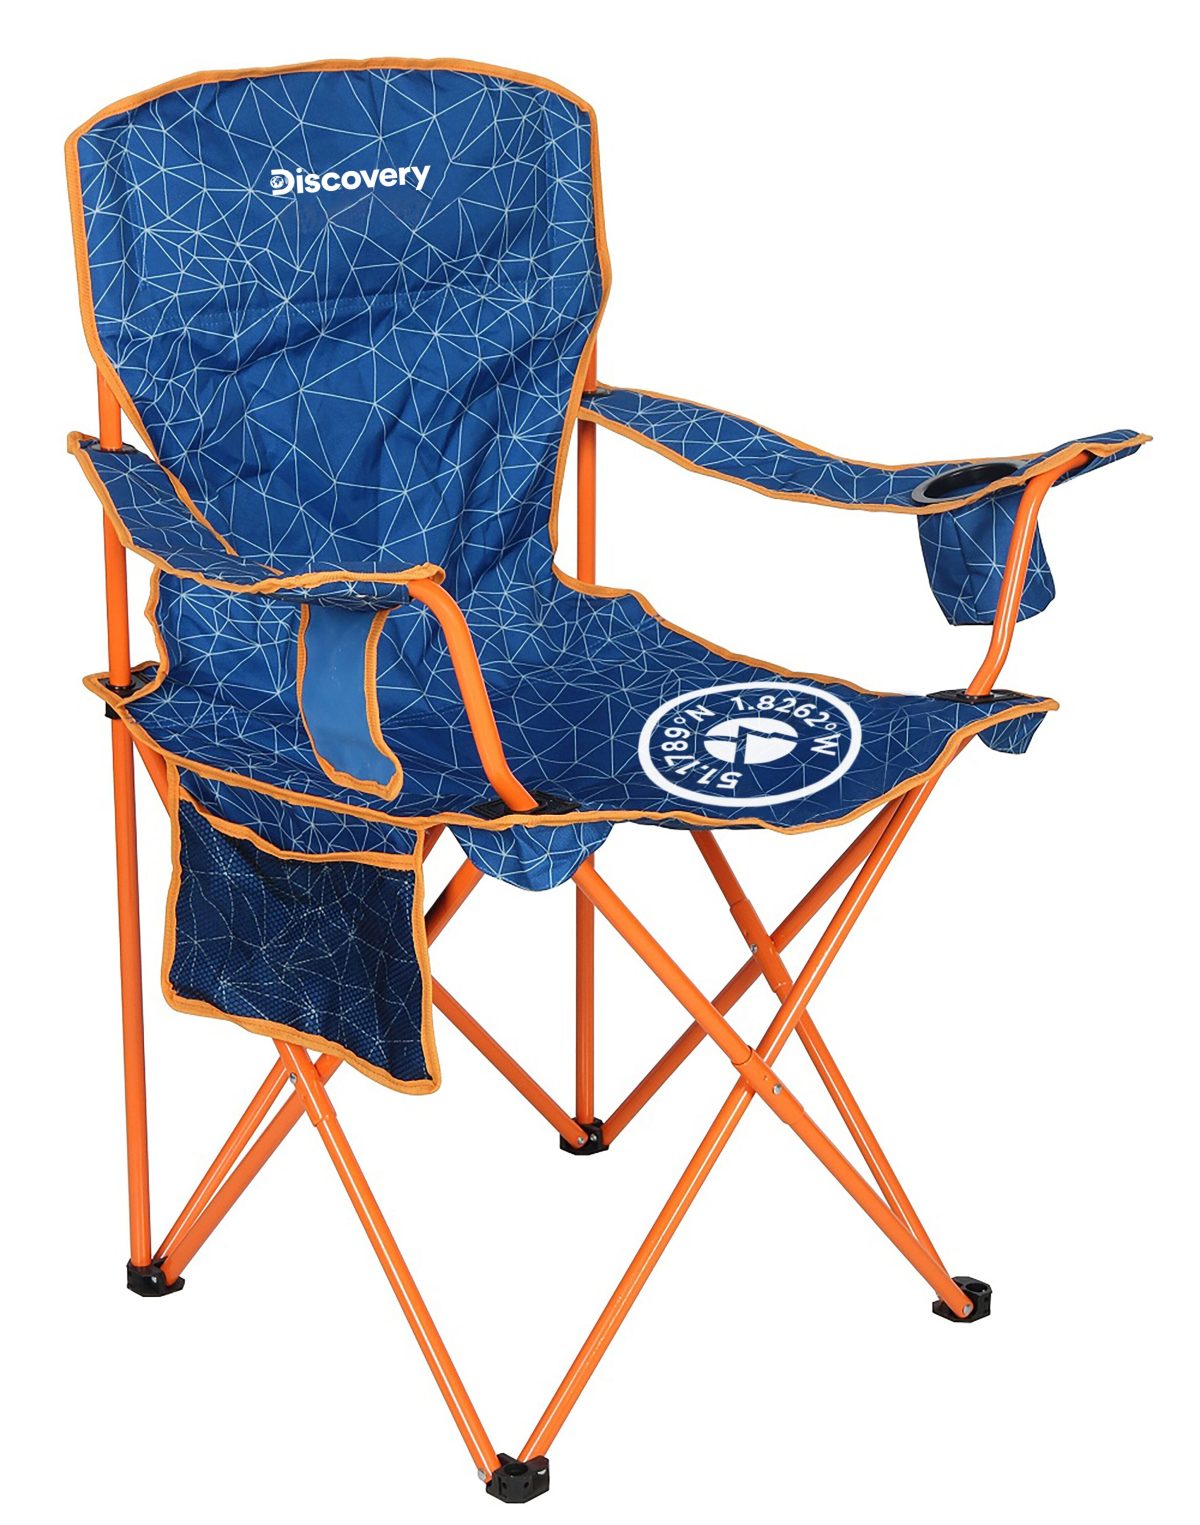 Discovery 400 Camping chair